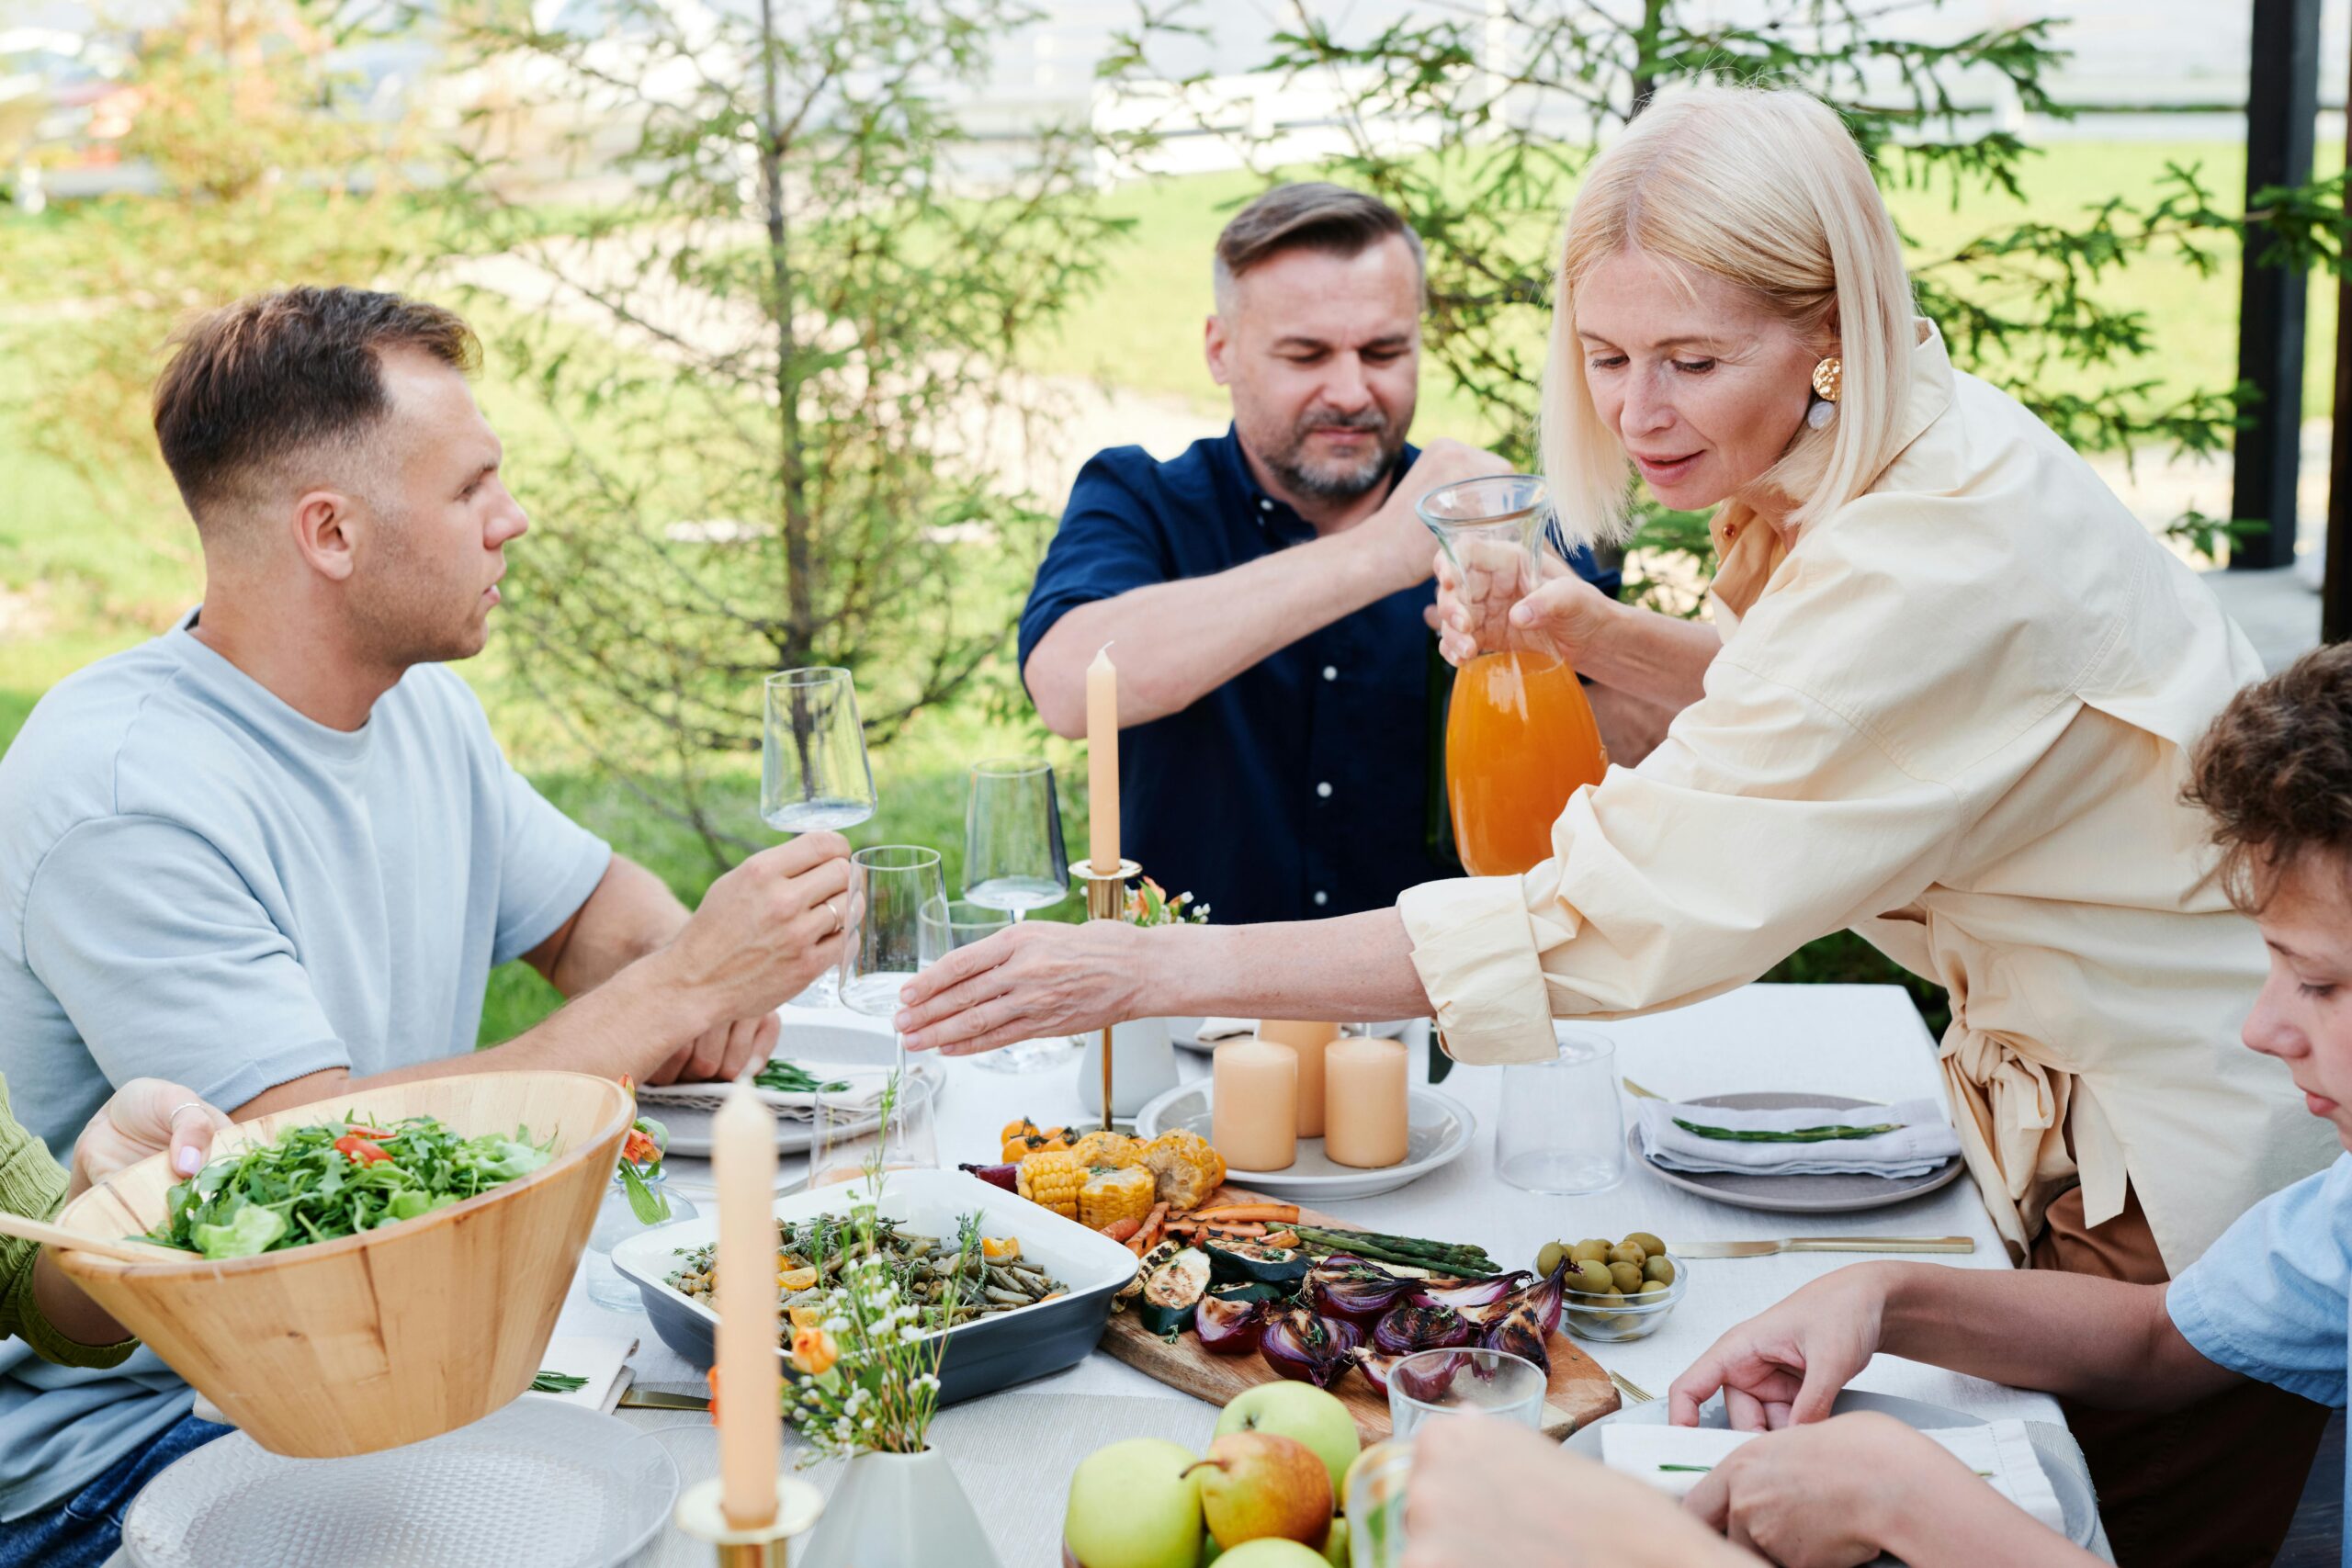 group of people eating together outdoors enjoying life together